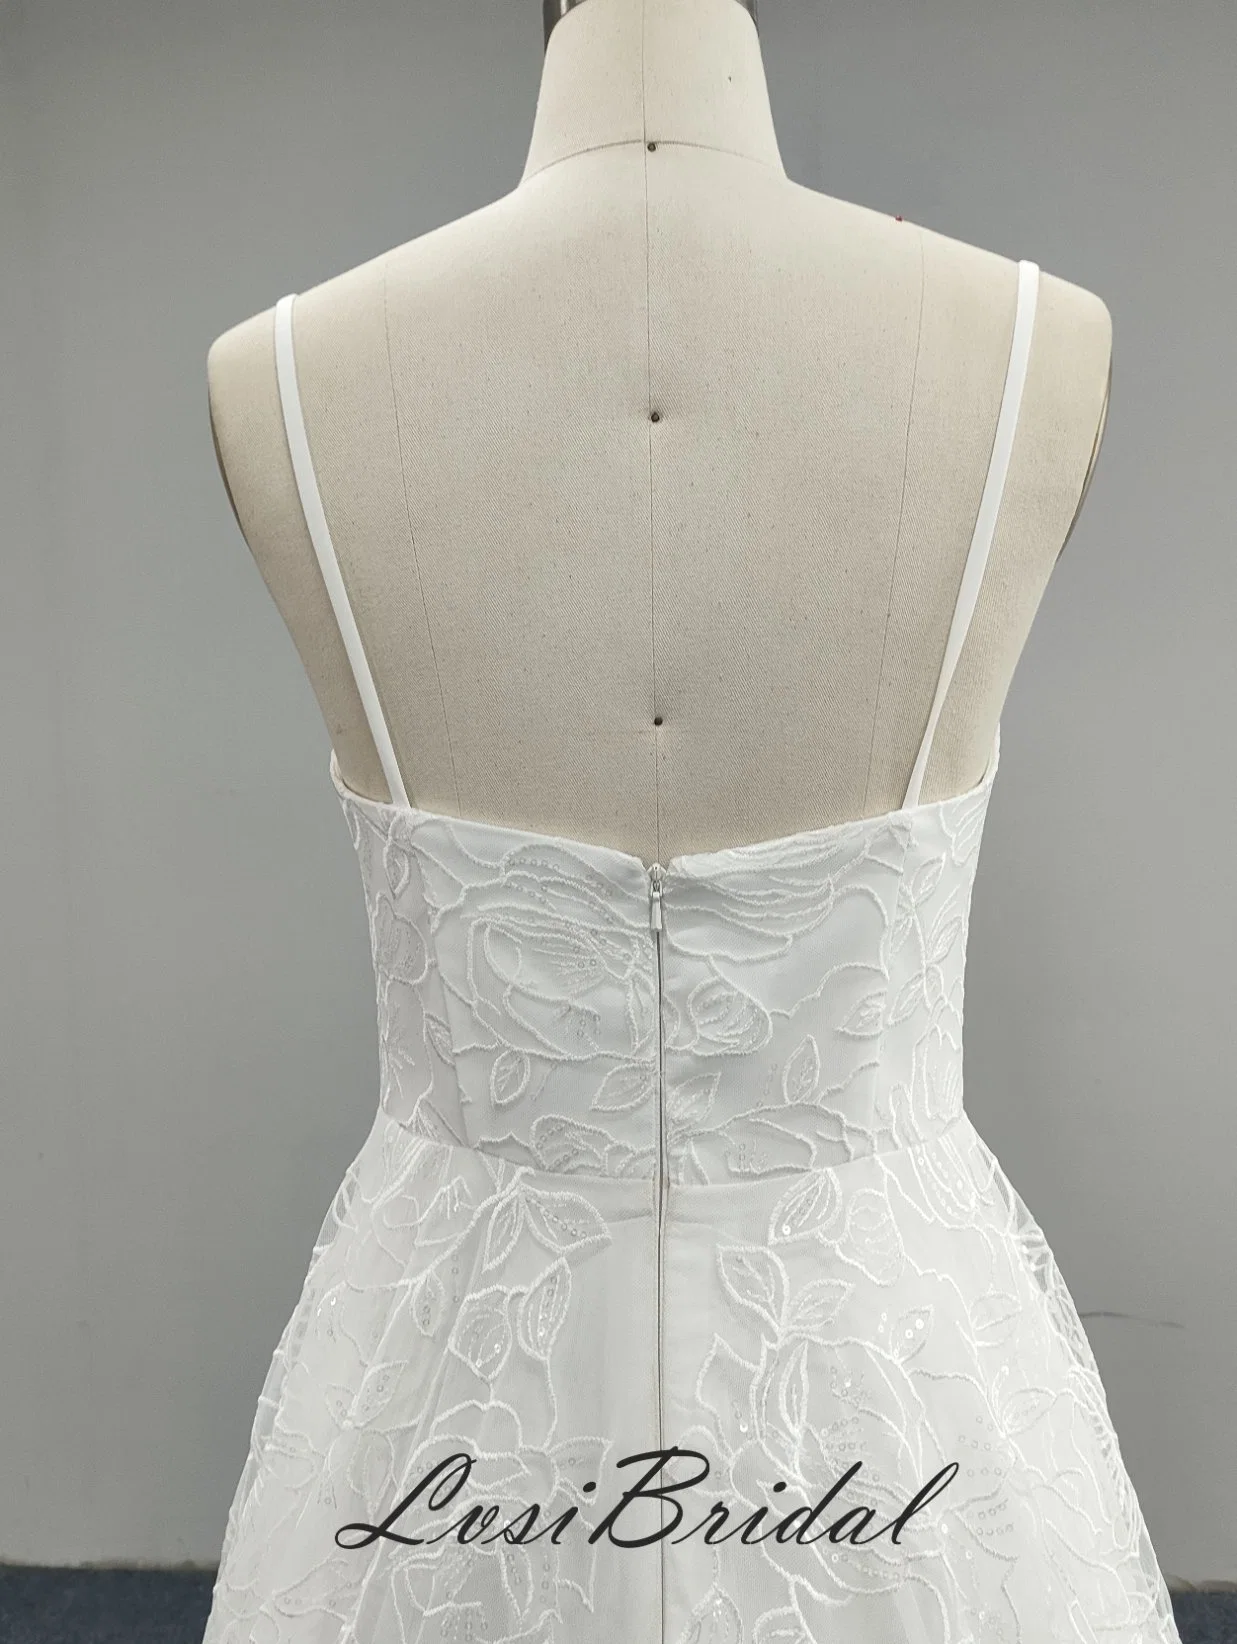 23019 Square Neckline and Spaghetti Straps Wedding Dress with Embroidery Lace A-Line Skirt Bridal Gown Dress with Long Train Dress 2023 New Collection